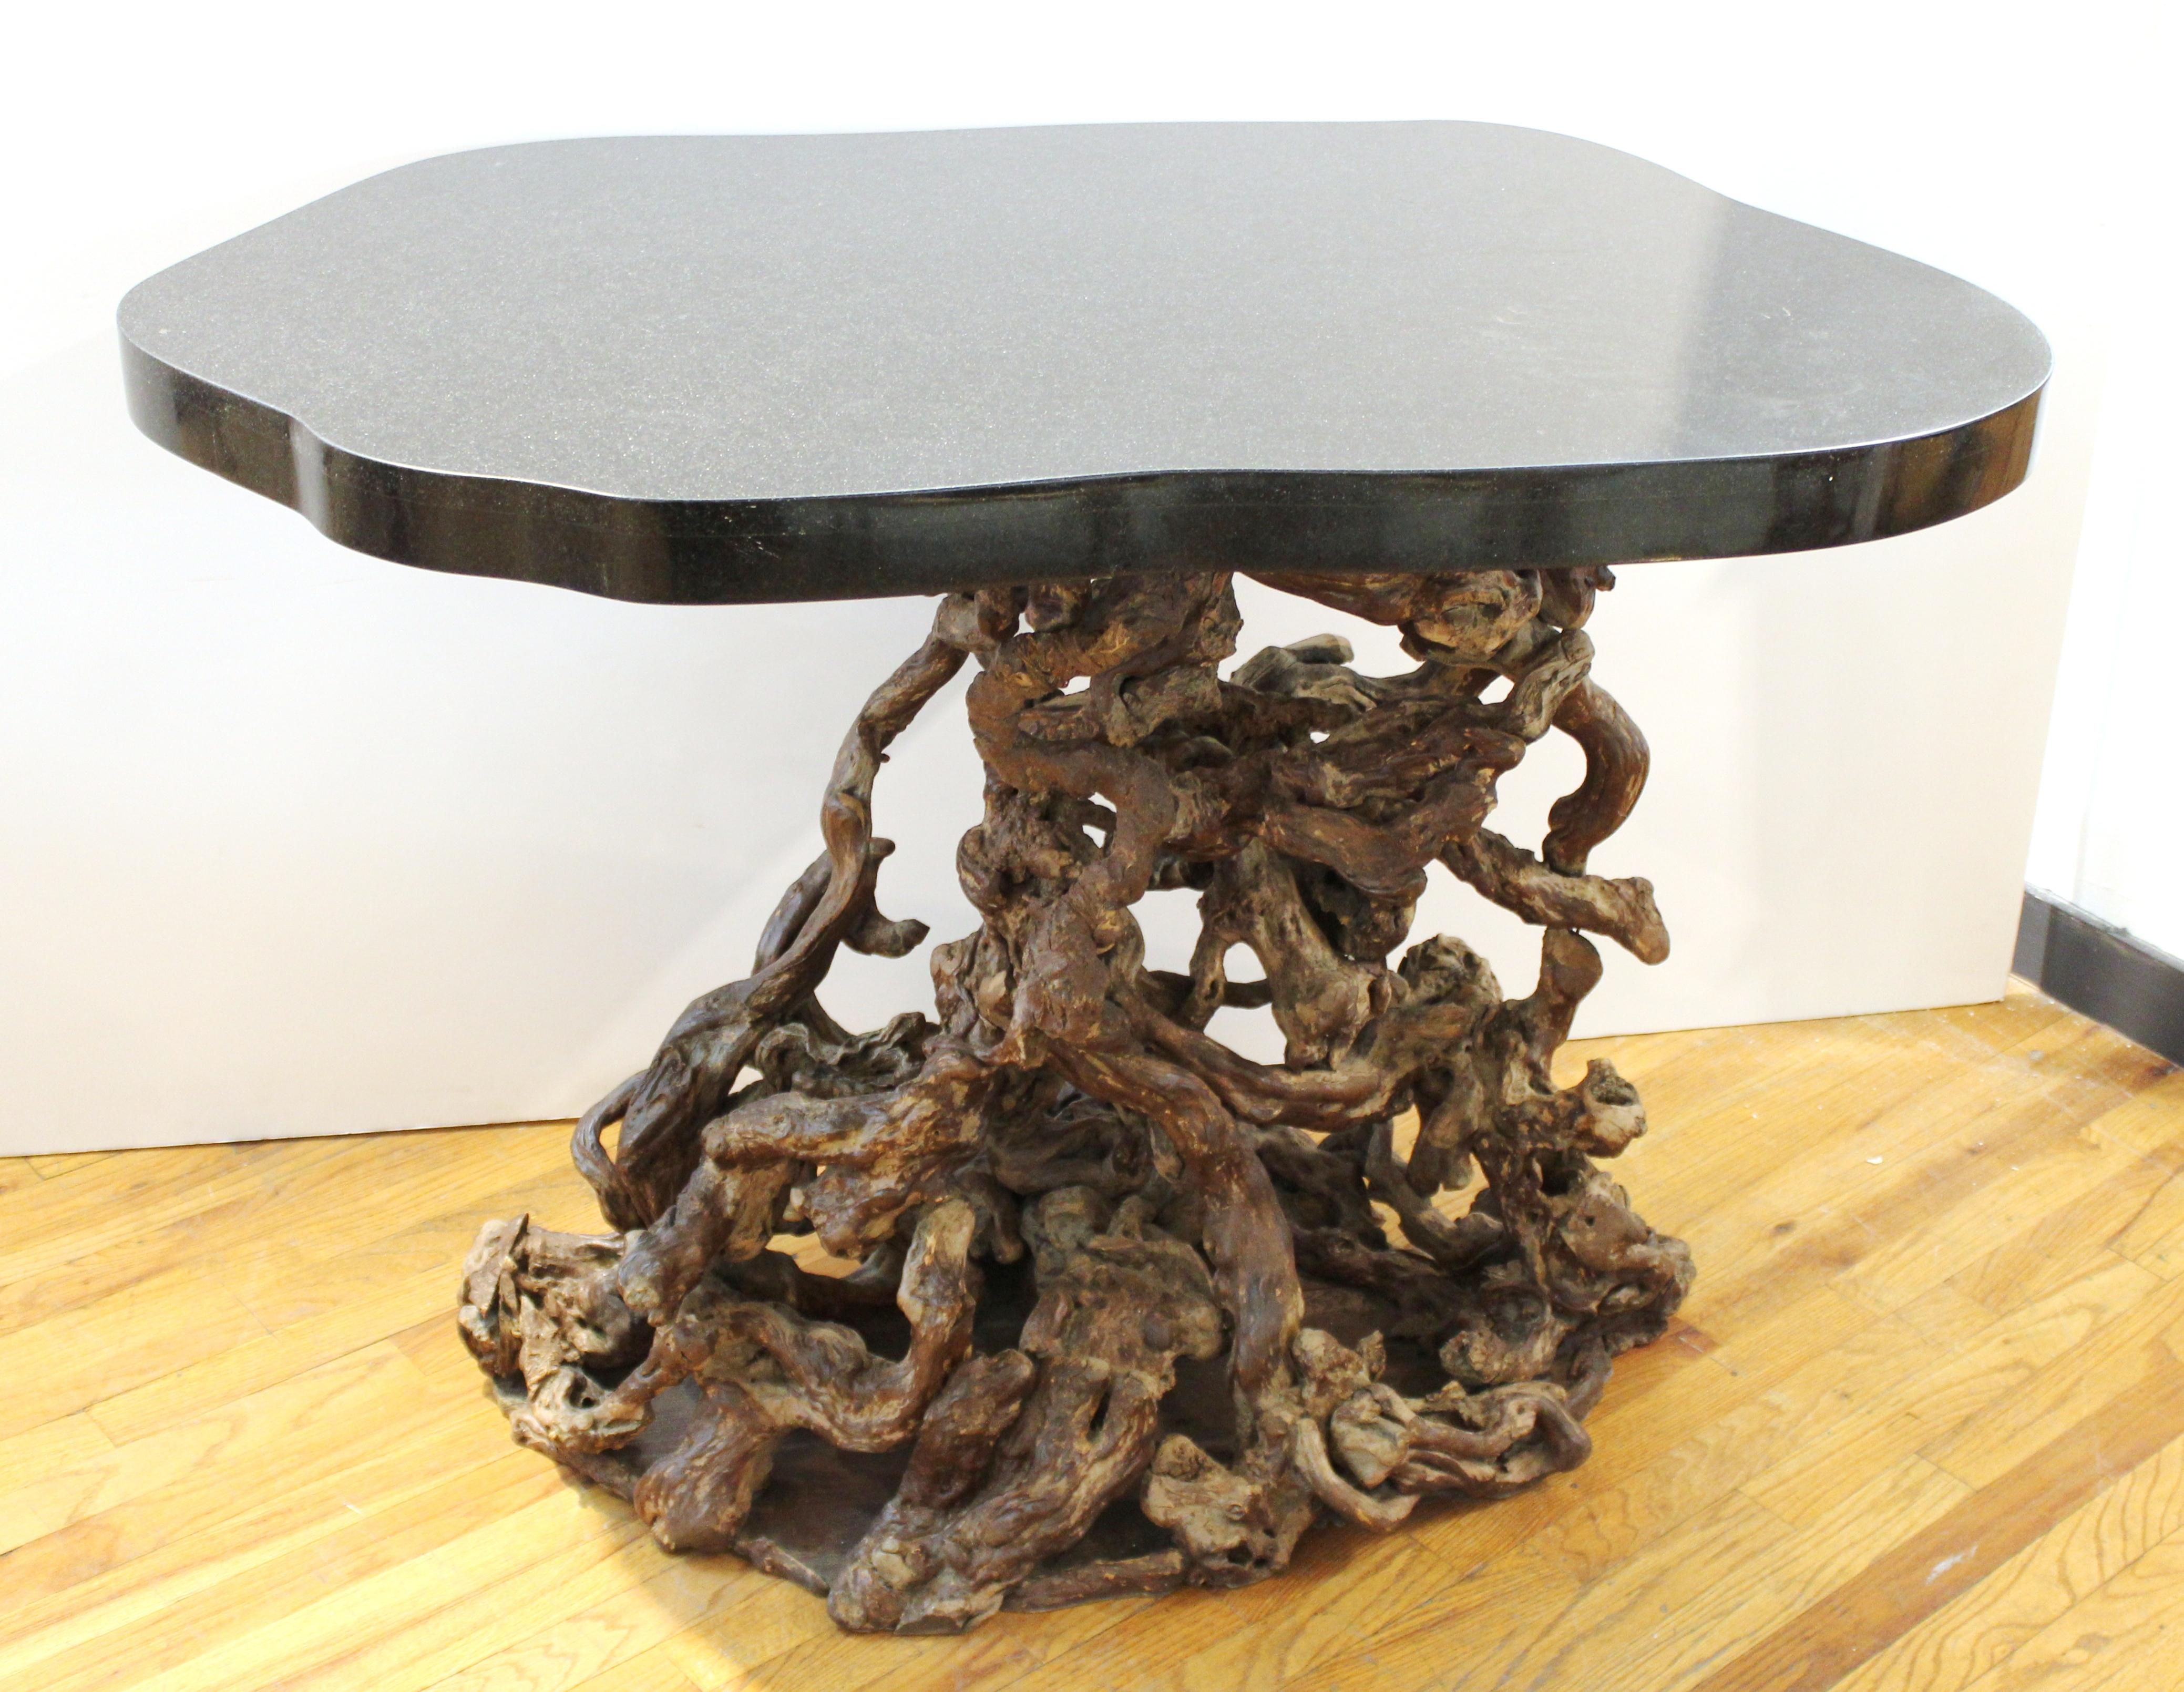 Modern console table or center table with a base made of assembled tree roots and an amorphous heavy stone top.
From a private residence at the Pierre Hotel in New York City.